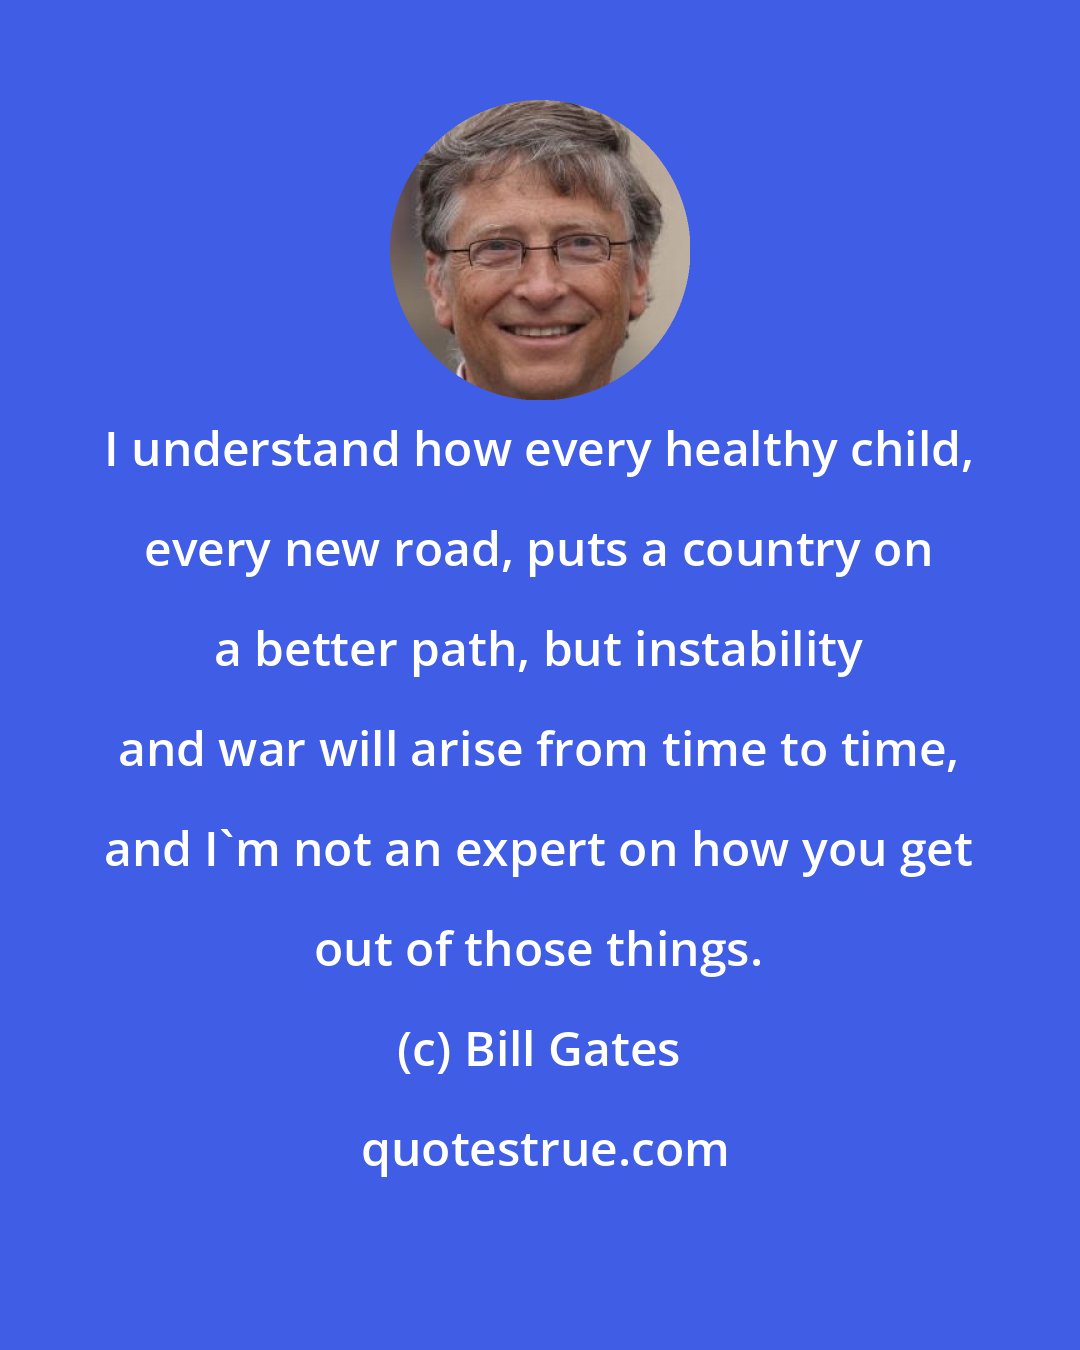 Bill Gates: I understand how every healthy child, every new road, puts a country on a better path, but instability and war will arise from time to time, and I'm not an expert on how you get out of those things.